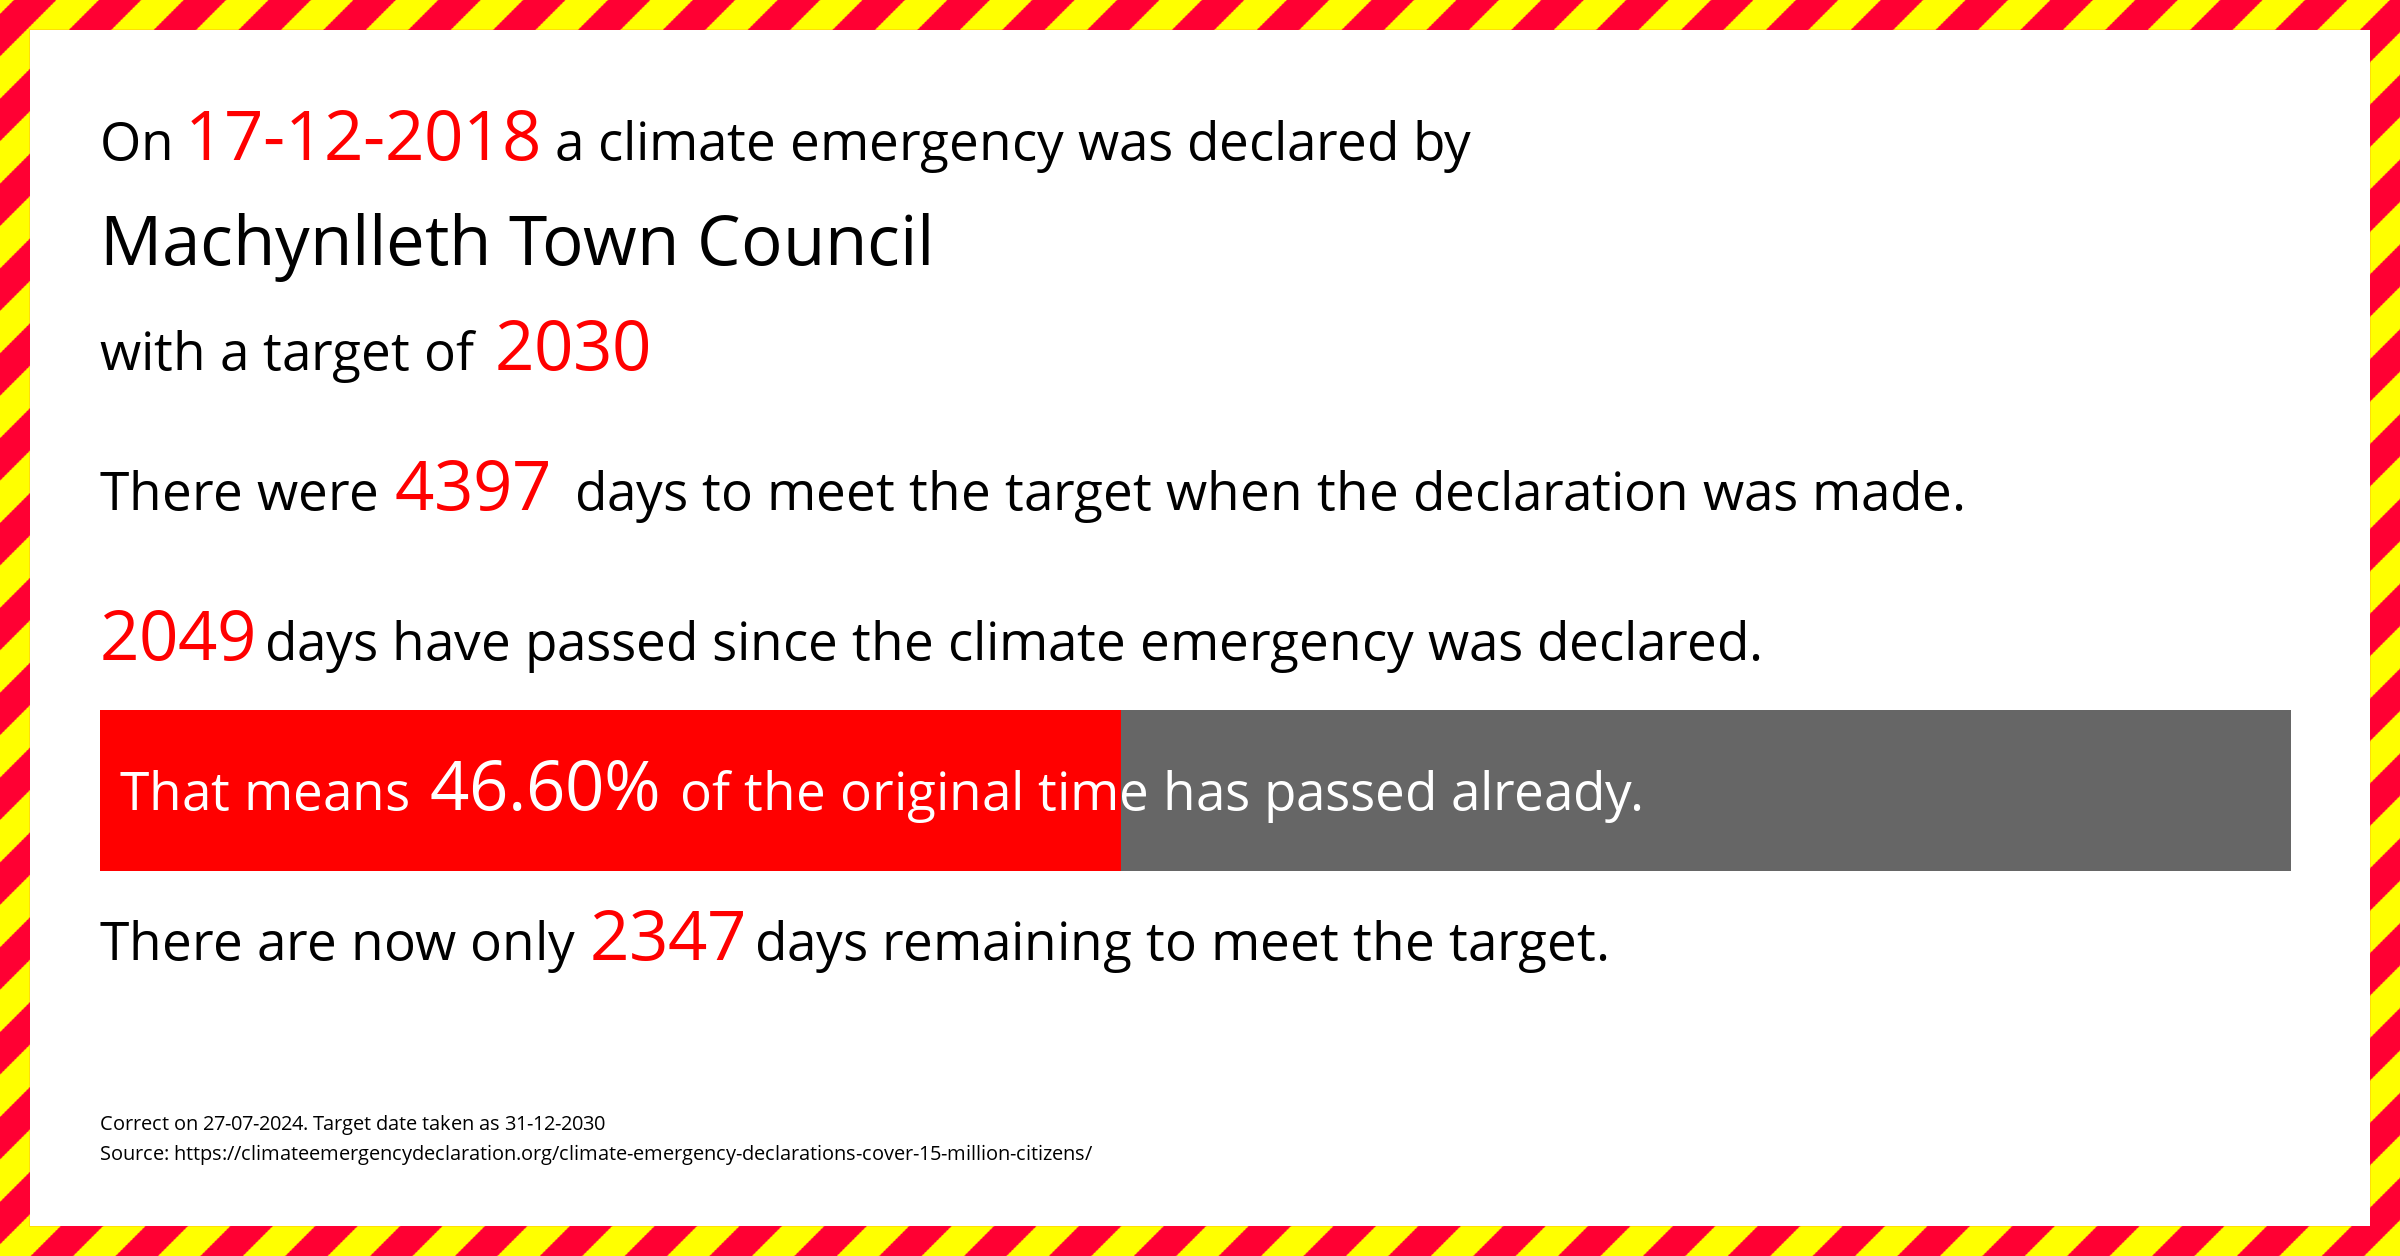 Machynlleth Town Council declared a Climate emergency on Monday 17th December 2018, with a target of 2030.